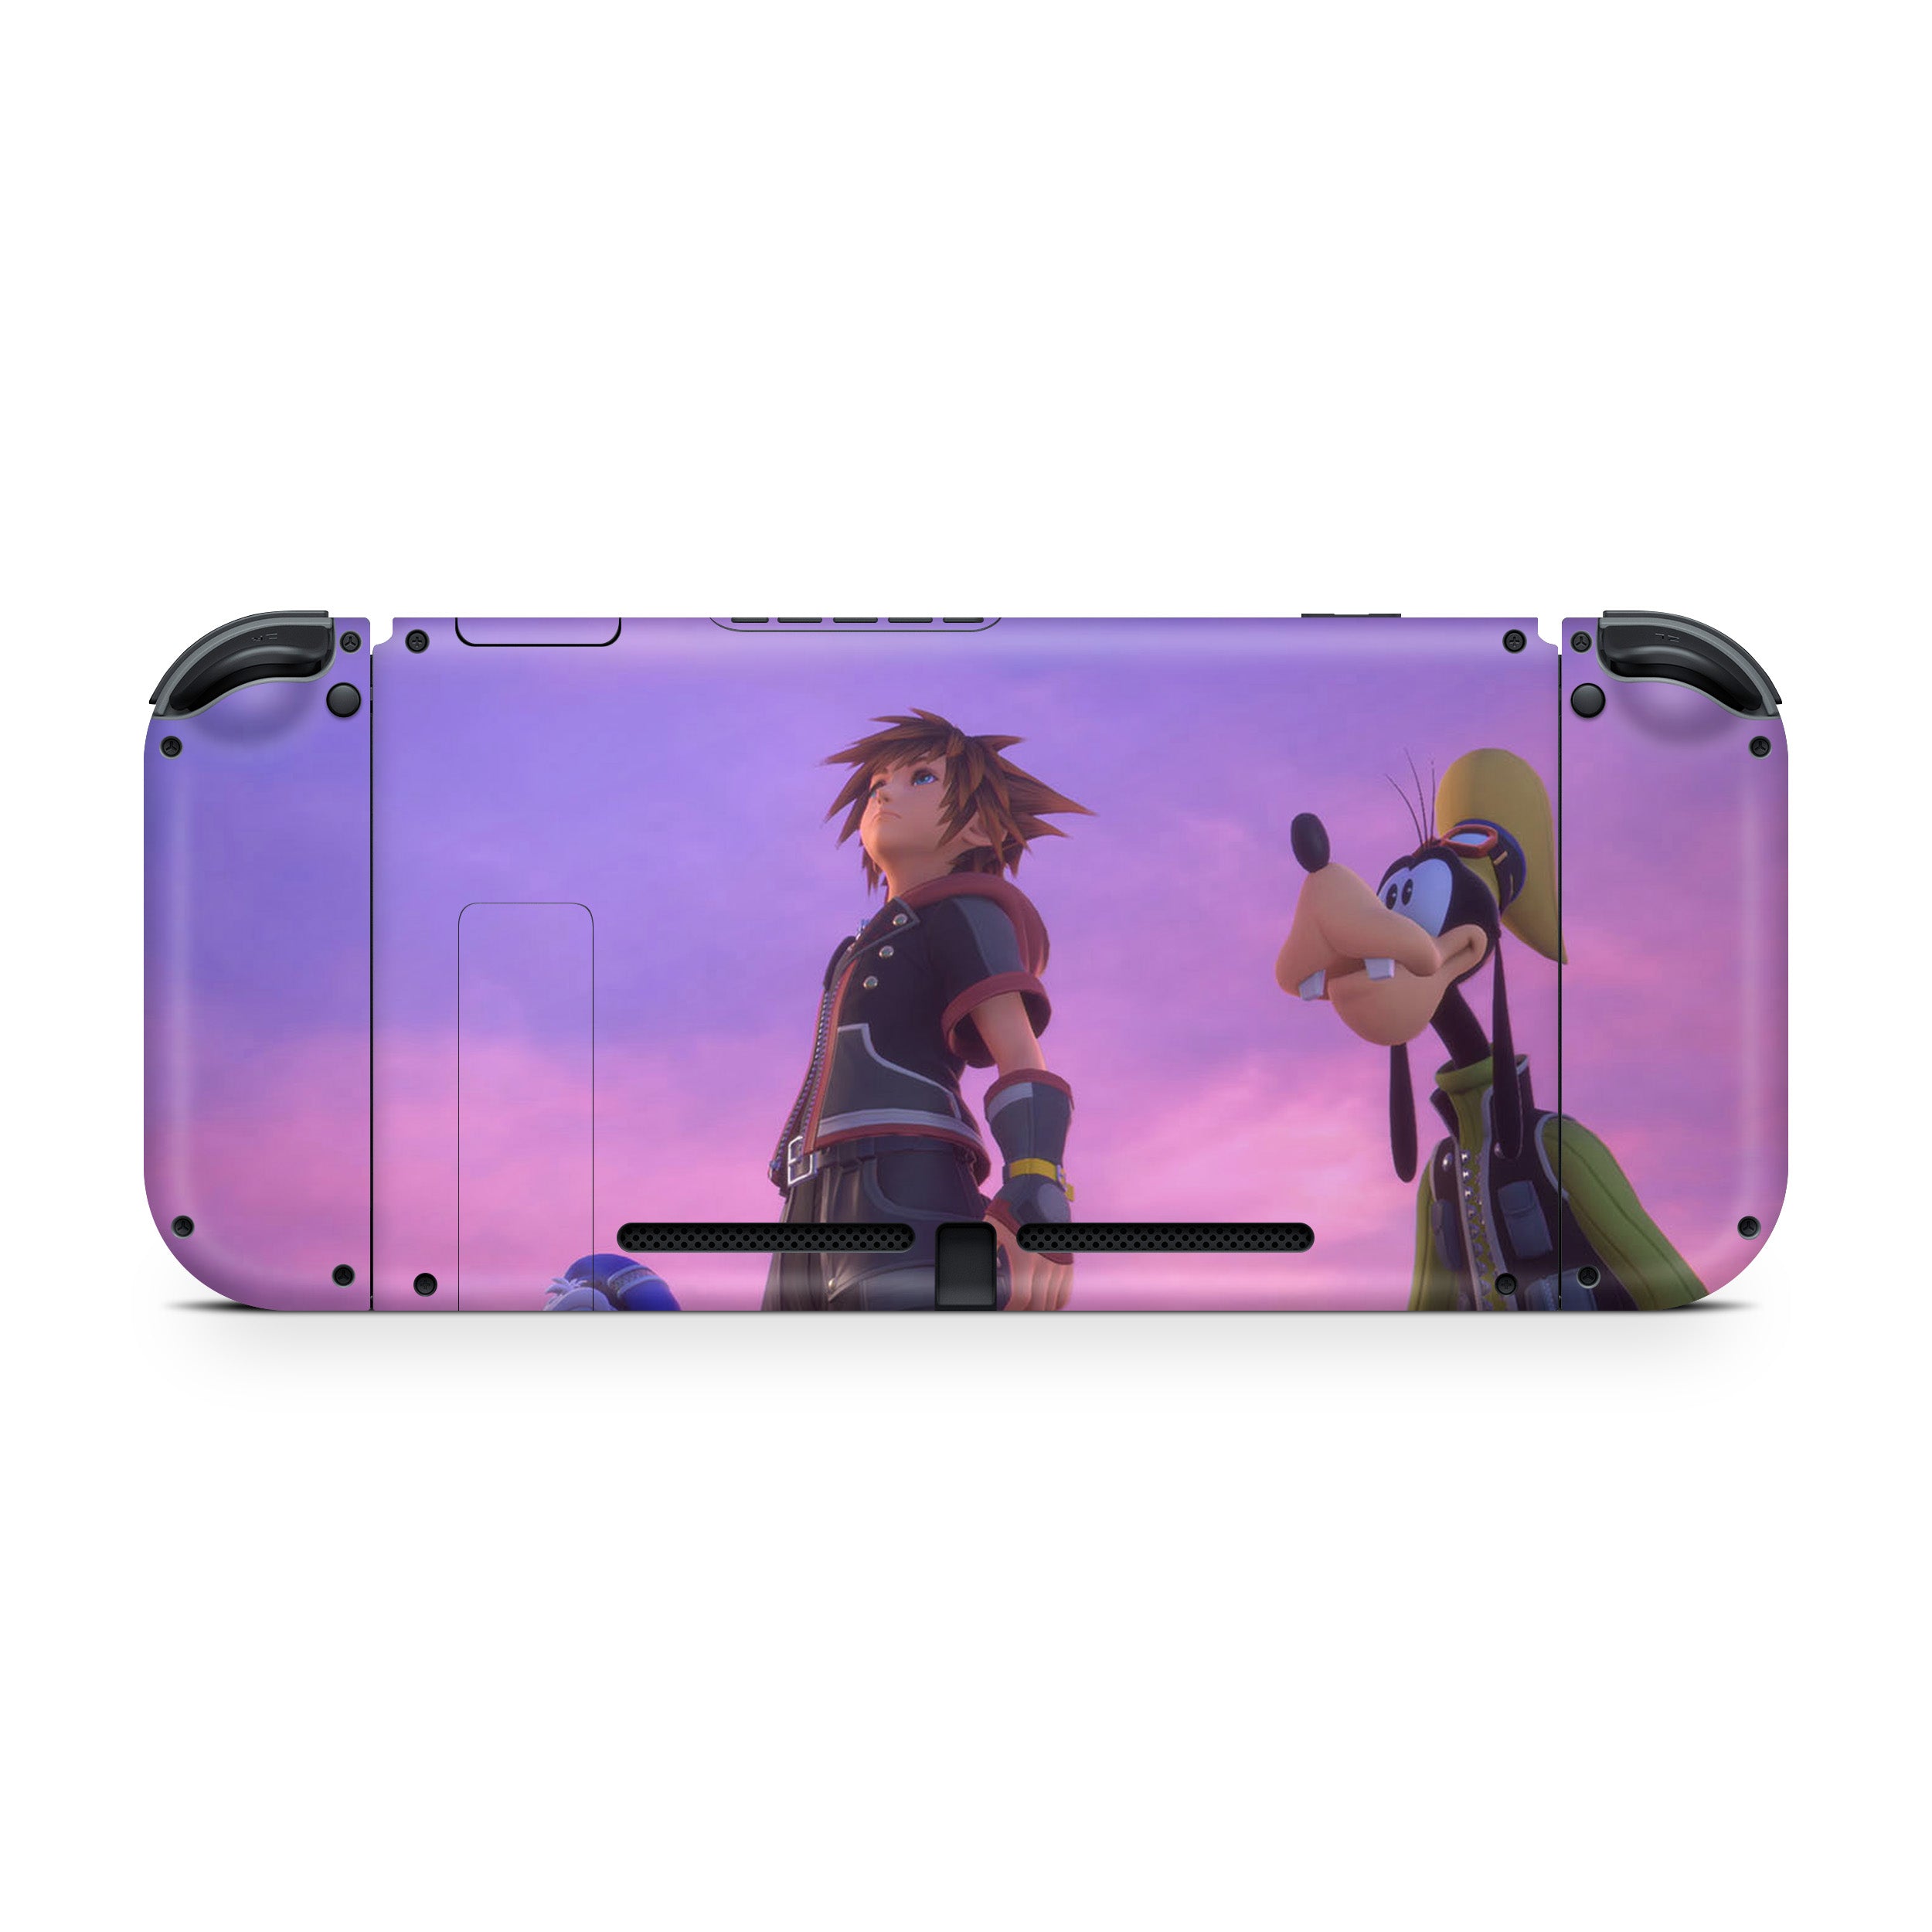 A video game skin featuring a Kingdom Hearts design for the Nintendo Switch.